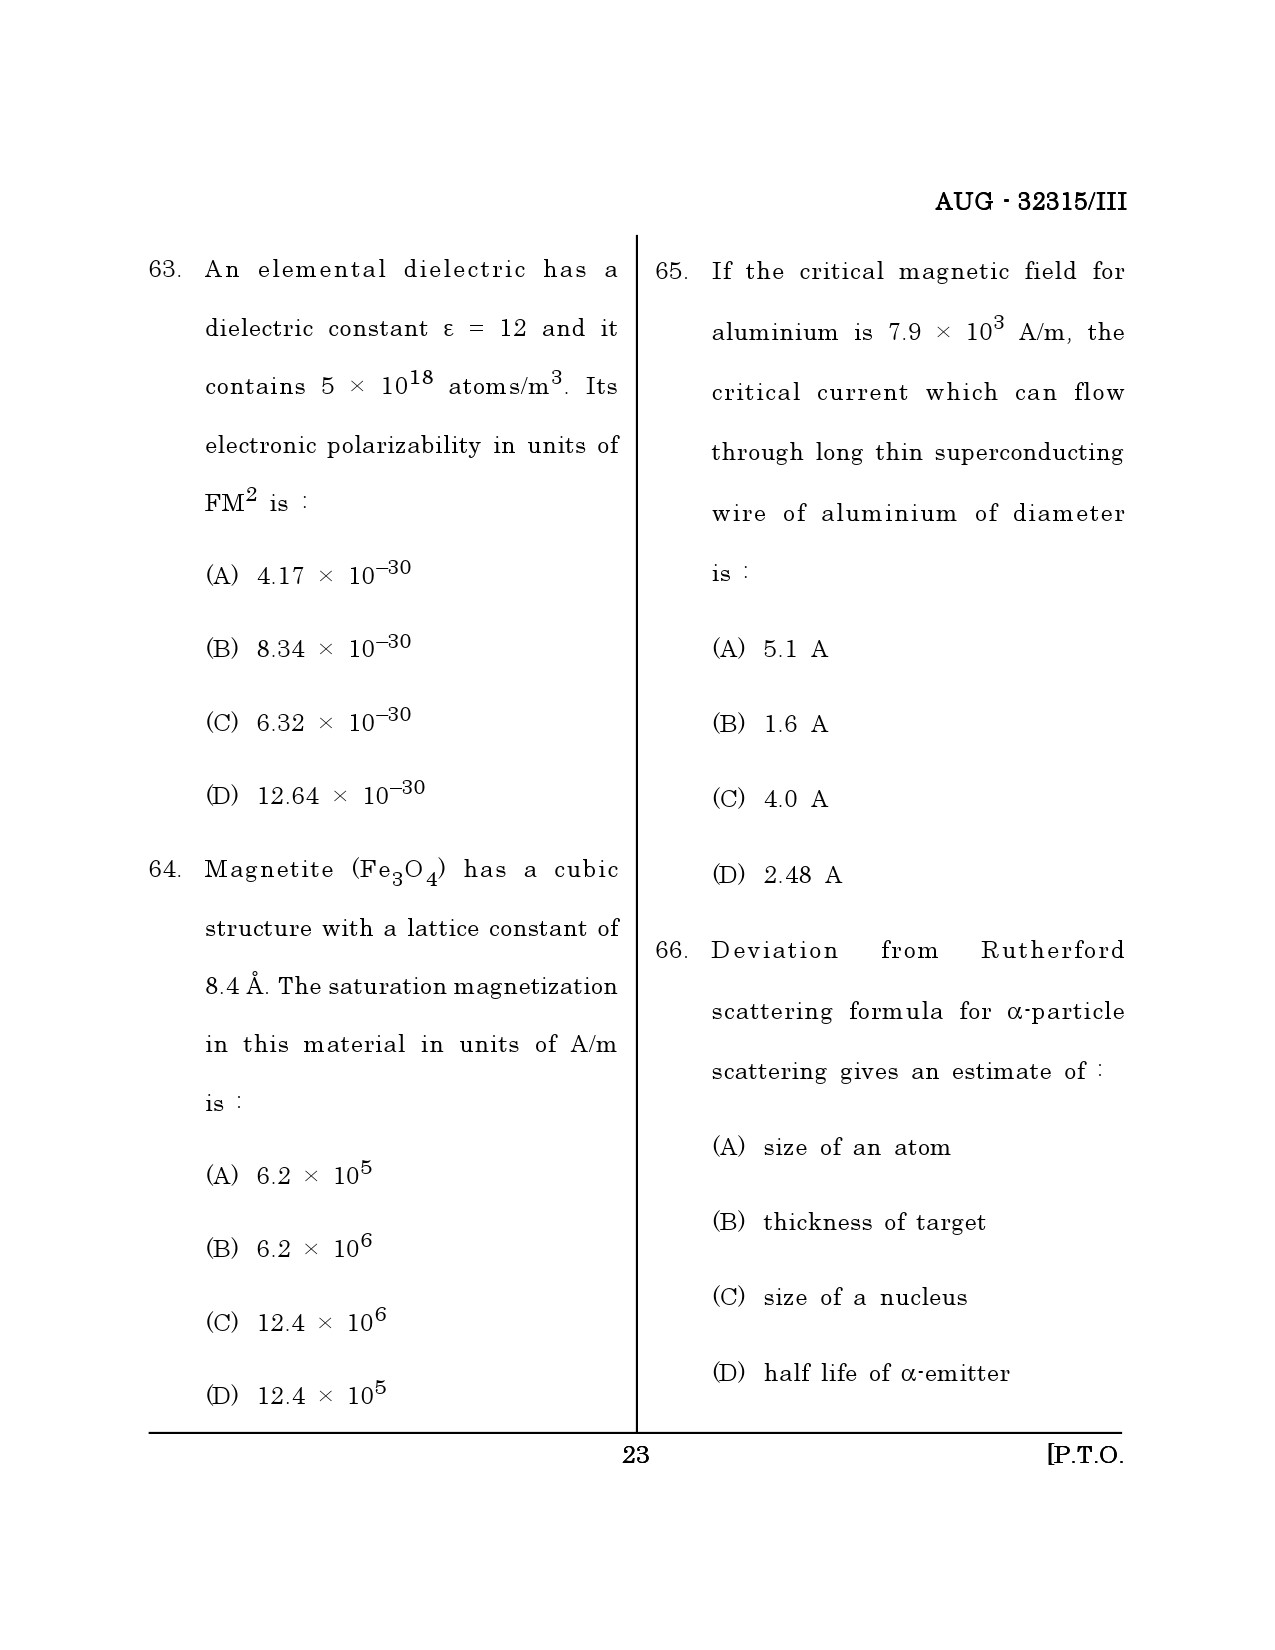 Maharashtra SET Physical Science Question Paper III August 2015 22